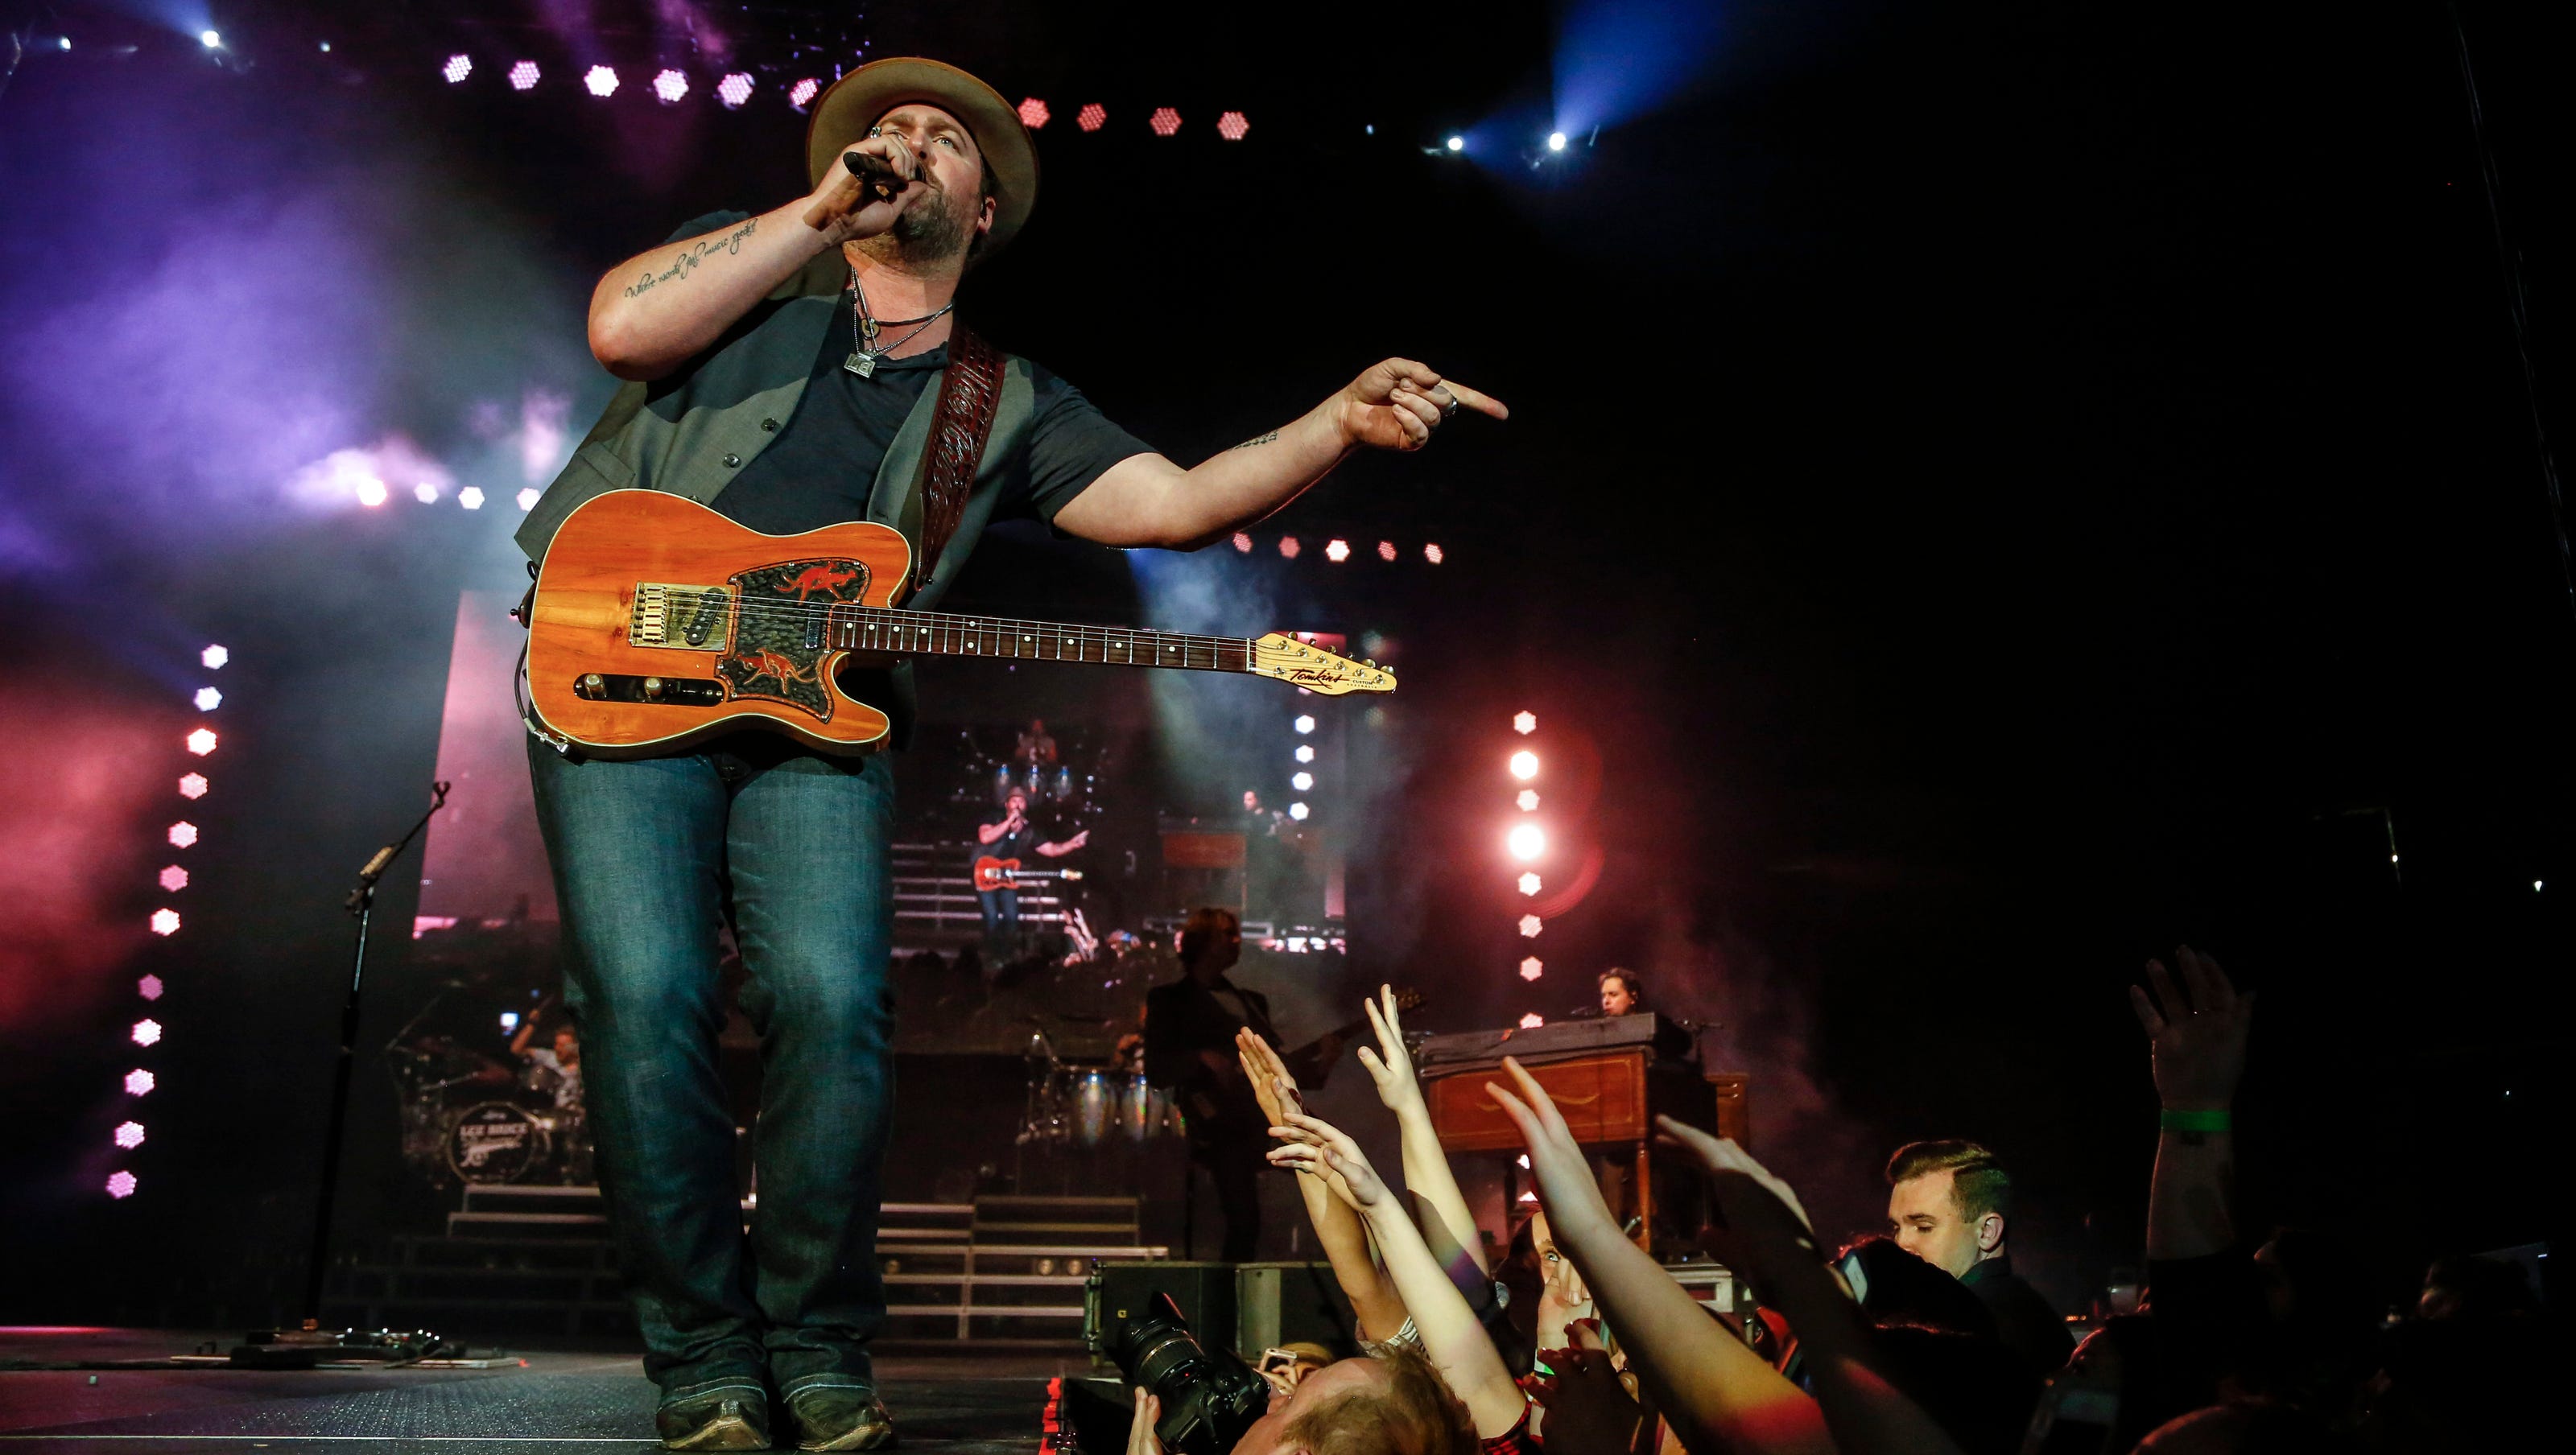 Lee Brice on his new album and recording from COVID-19 after CMA Awards